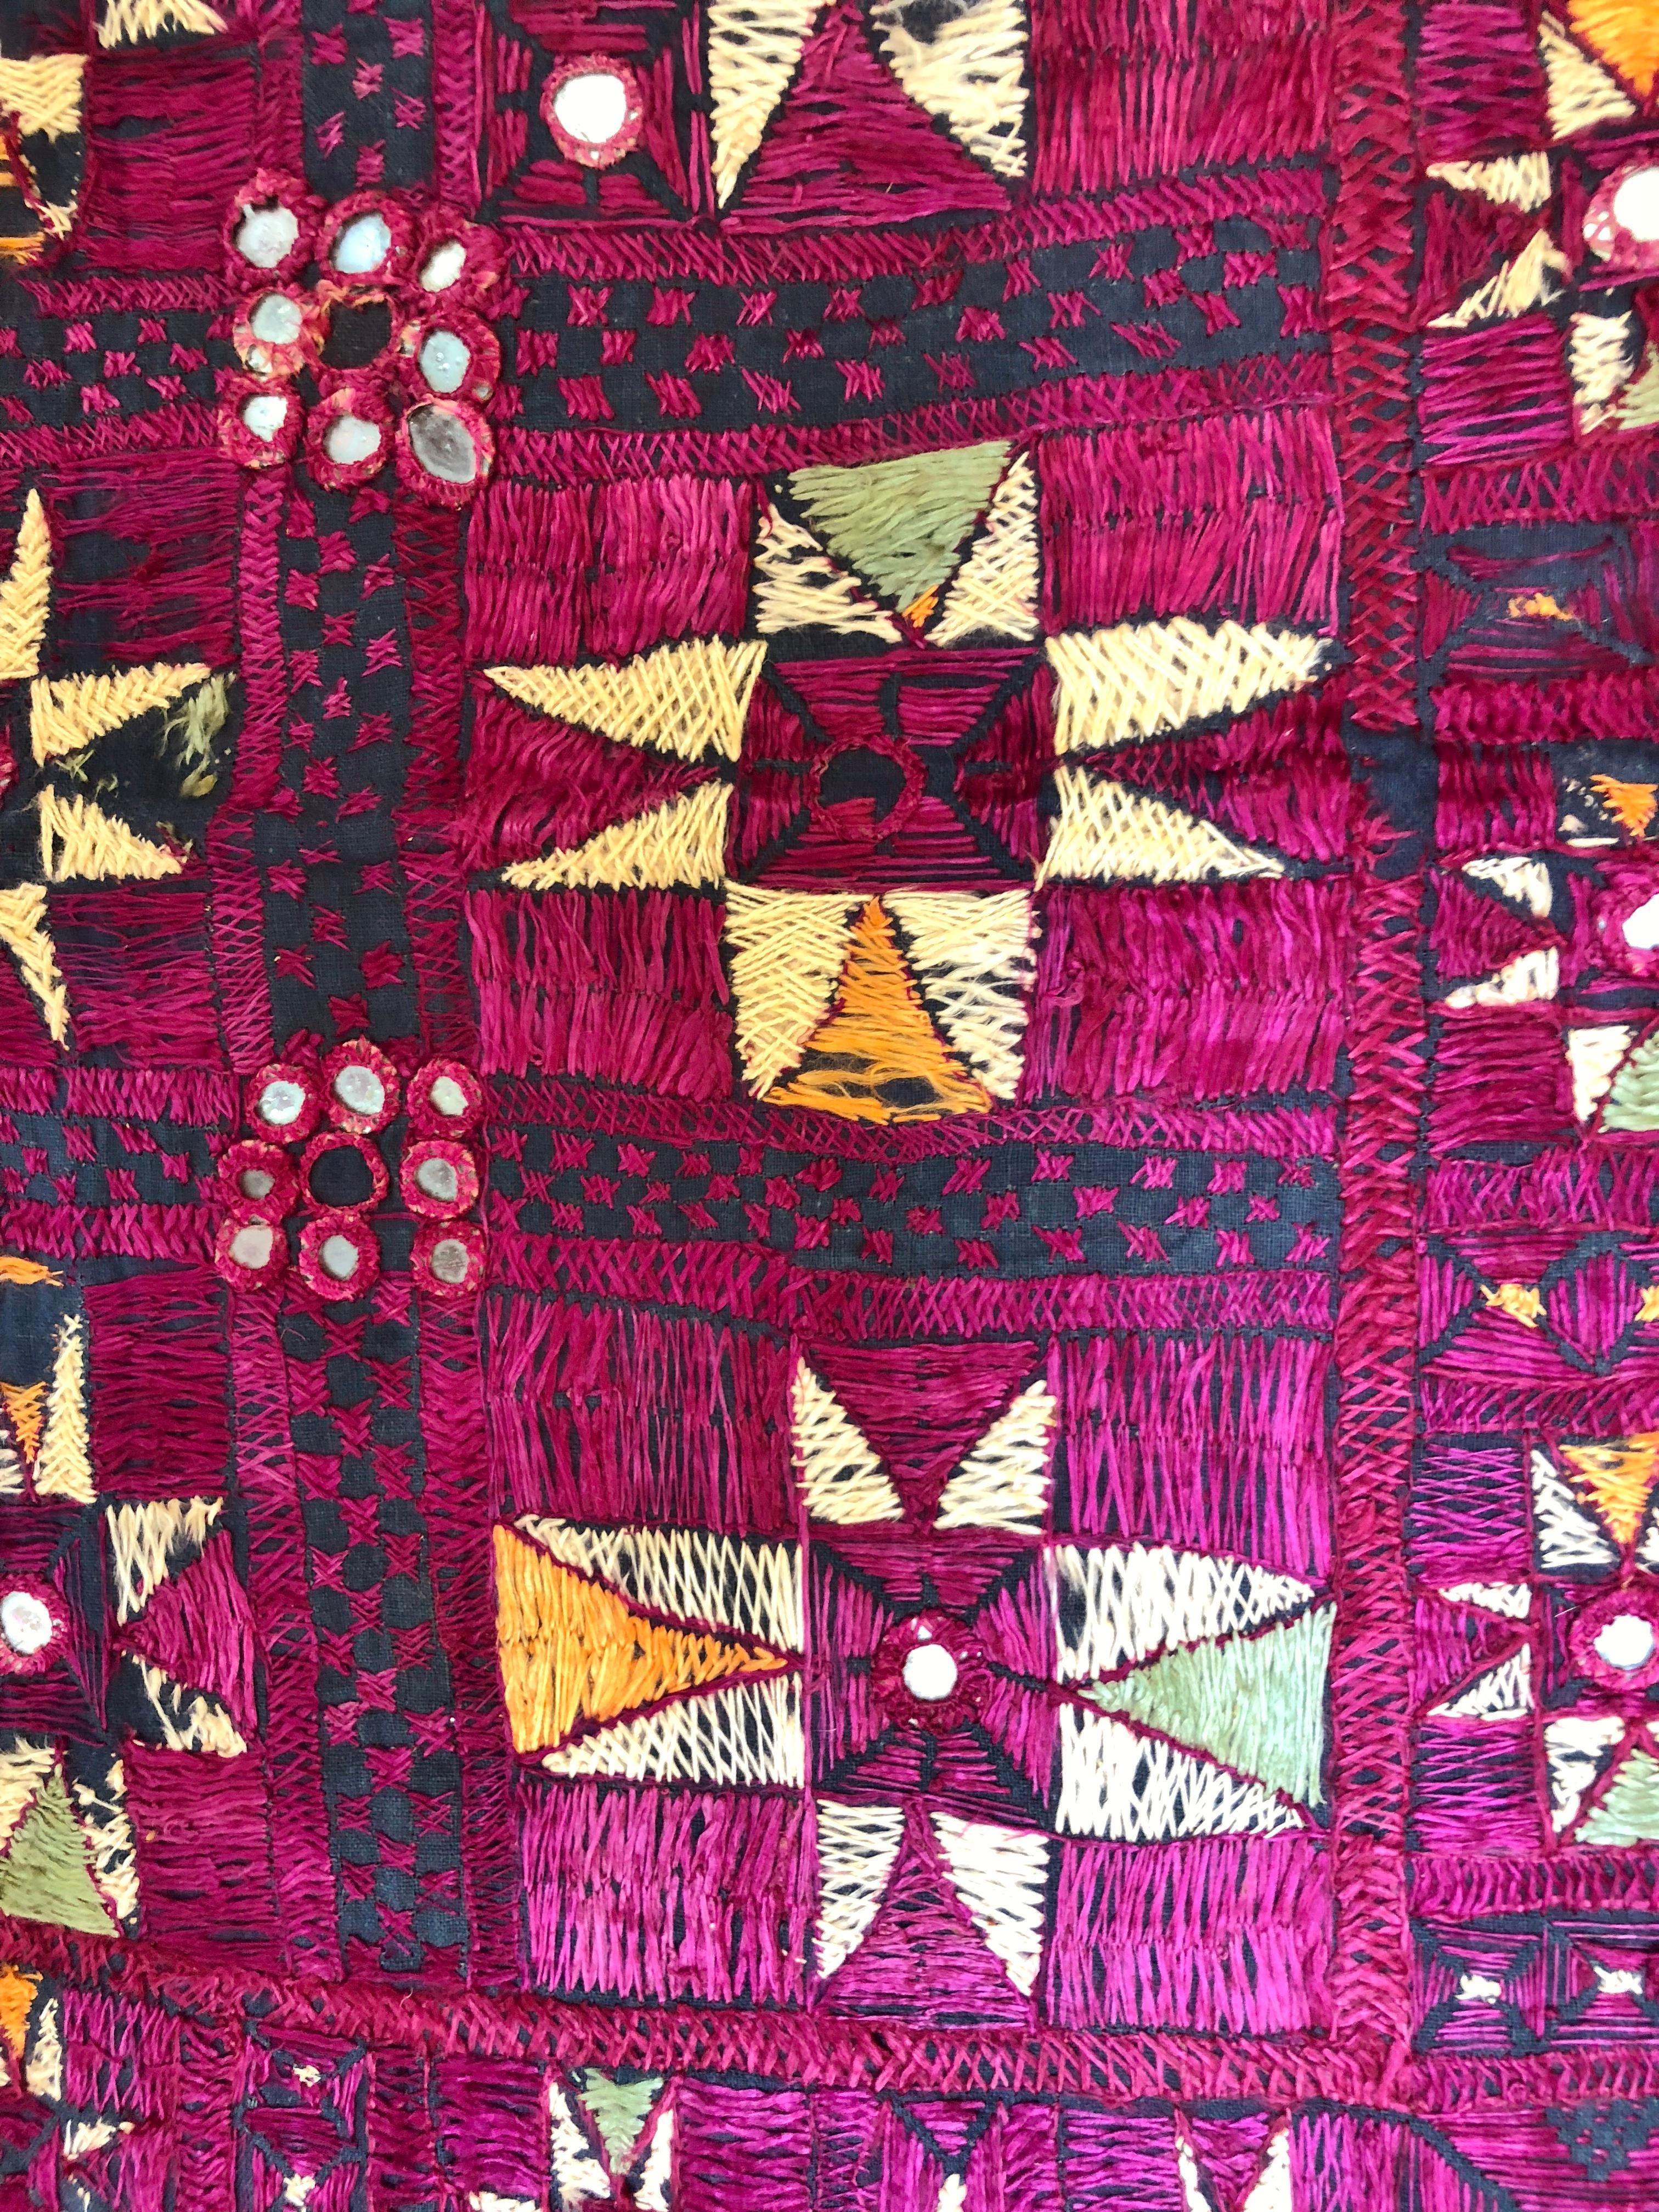 Vintage Banjara Tribal Embroidered Chaakla with Mirrors, Wall Hanging In Good Condition For Sale In Glen Ellyn, IL